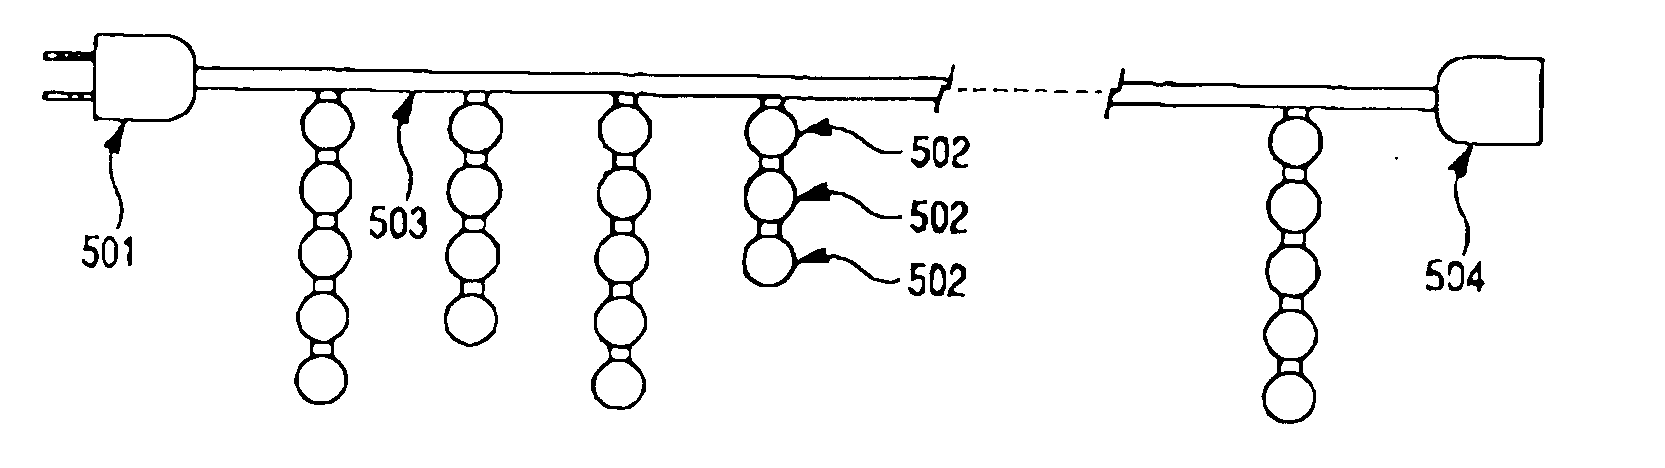 LED light string and arrays with improved harmonics and optimized power utilization